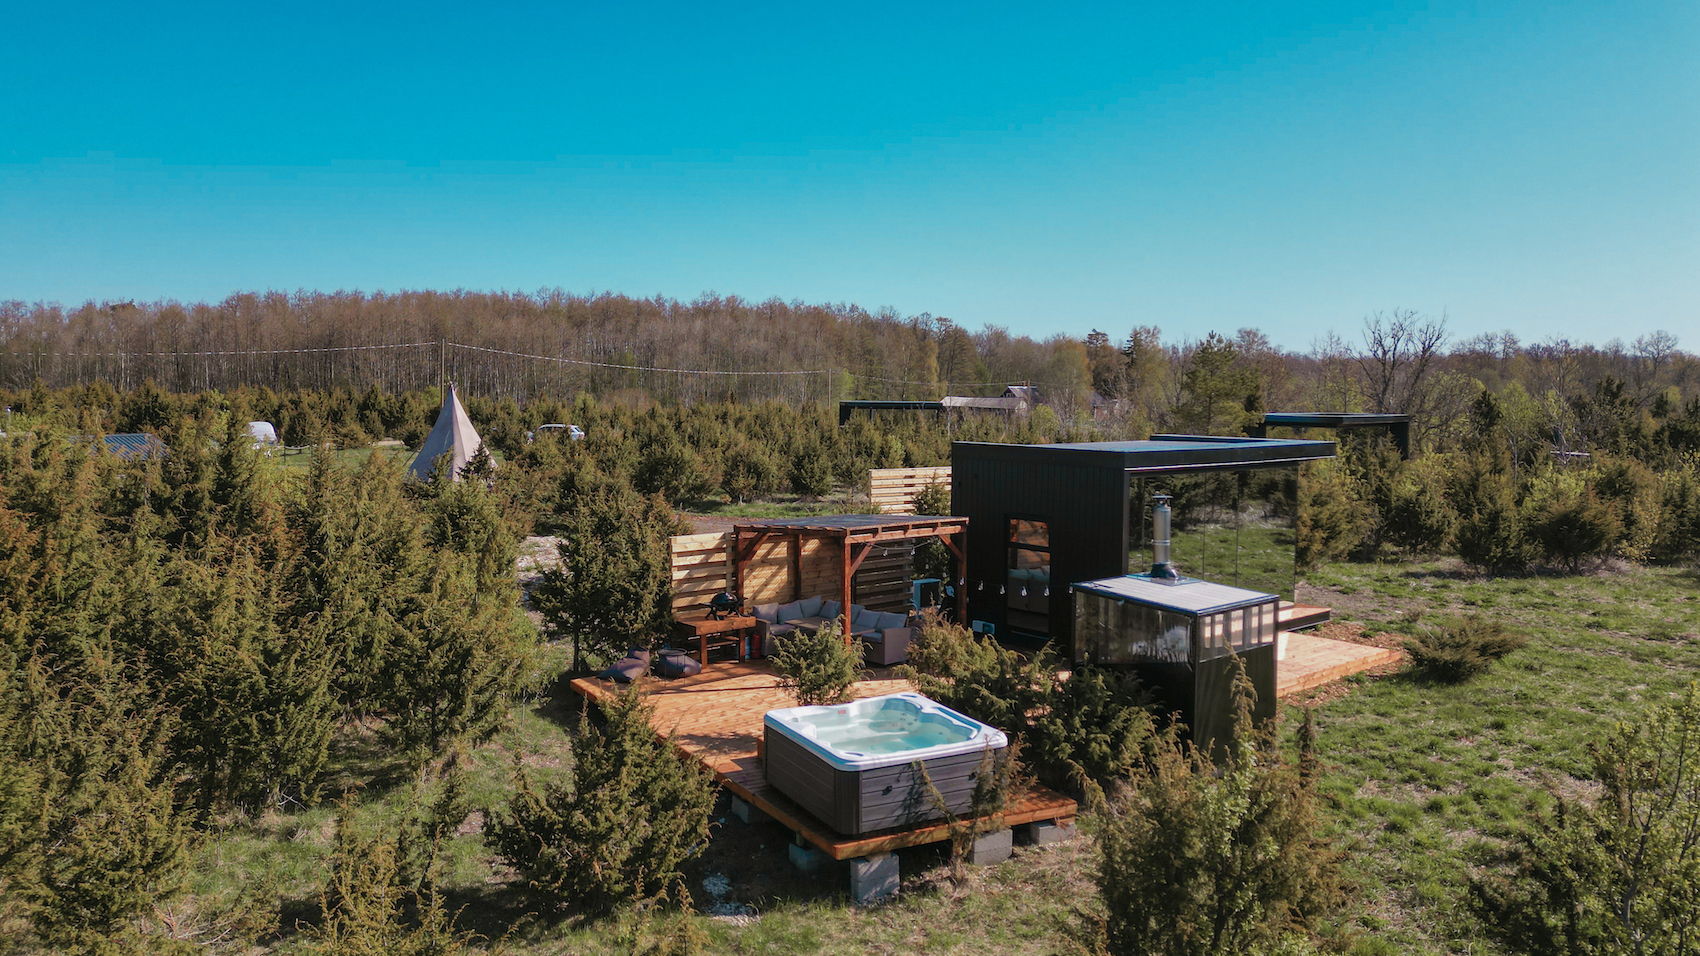 A holiday house with a sauna and a hot tub in the woods, Estonian cabin mirror house with jacuzzi - Juniper Minivillas, the best holiday homes in Estonia